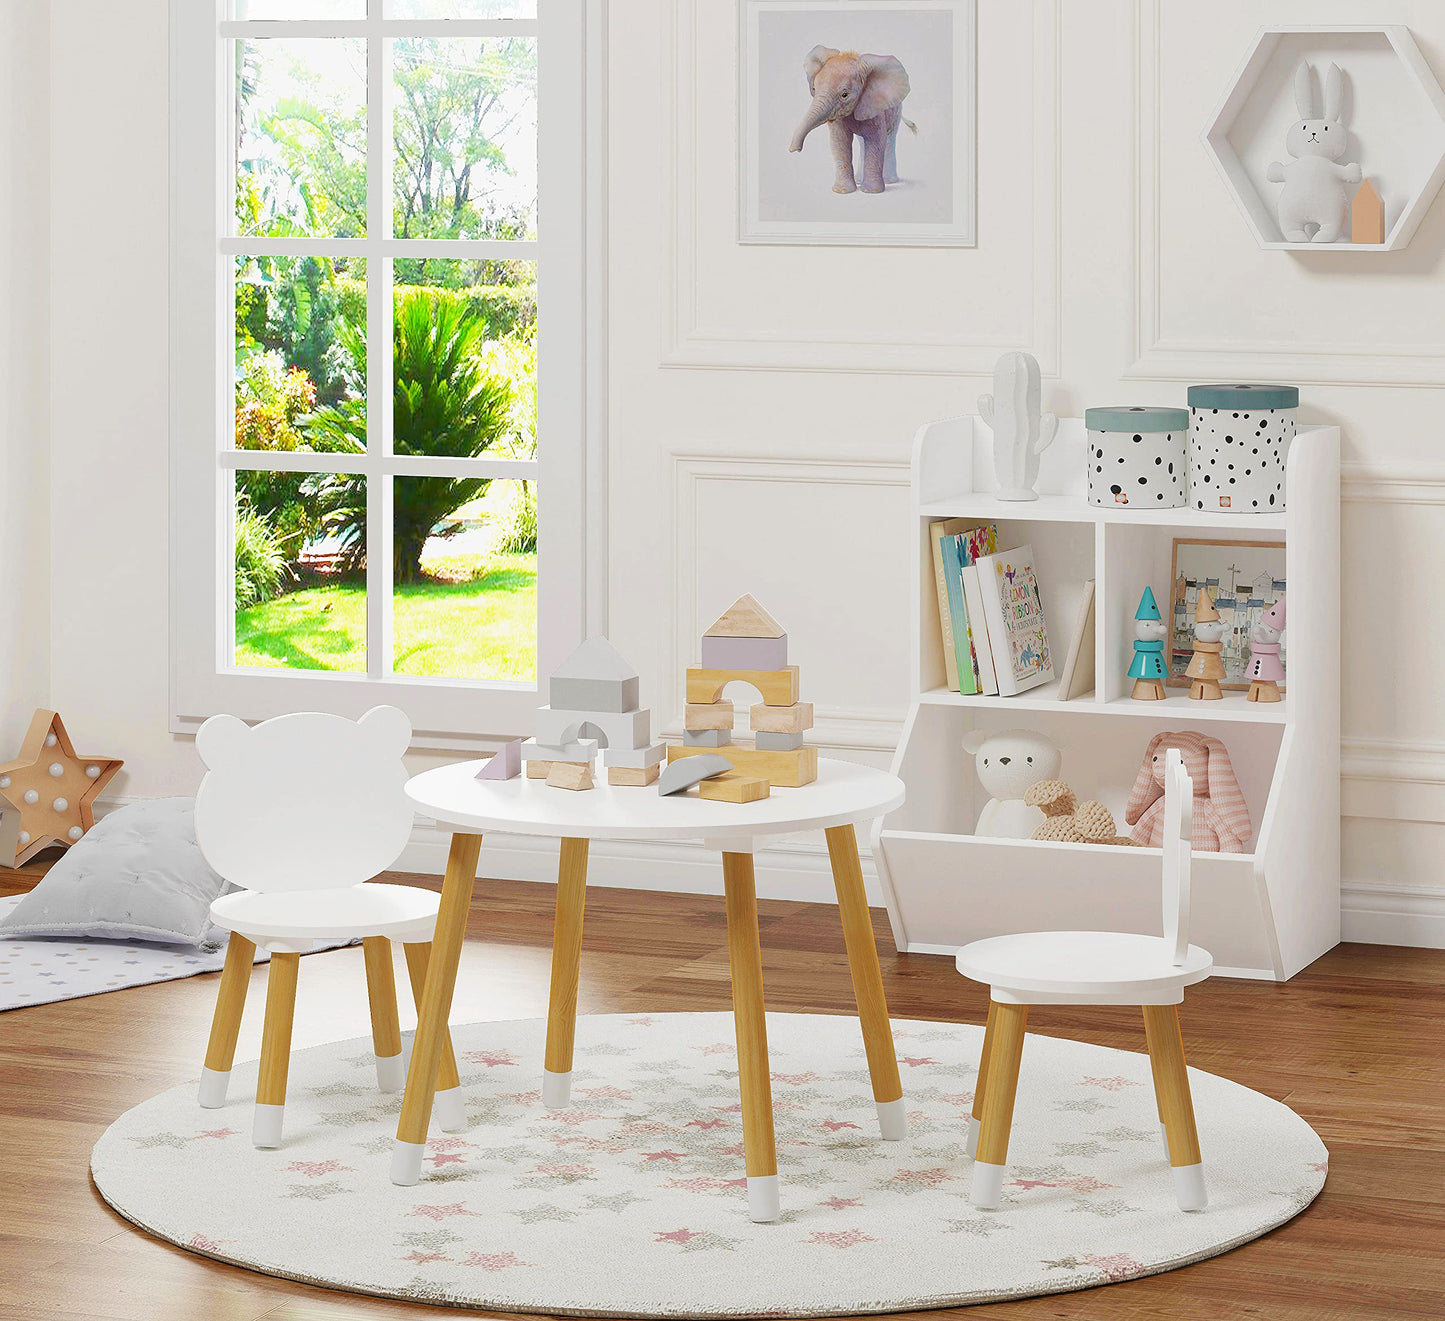 UTEX Kids Table with 2 Chairs Set for Toddlers, Boys, Girls, 3 Piece Kiddy Table and Chairs Set, White